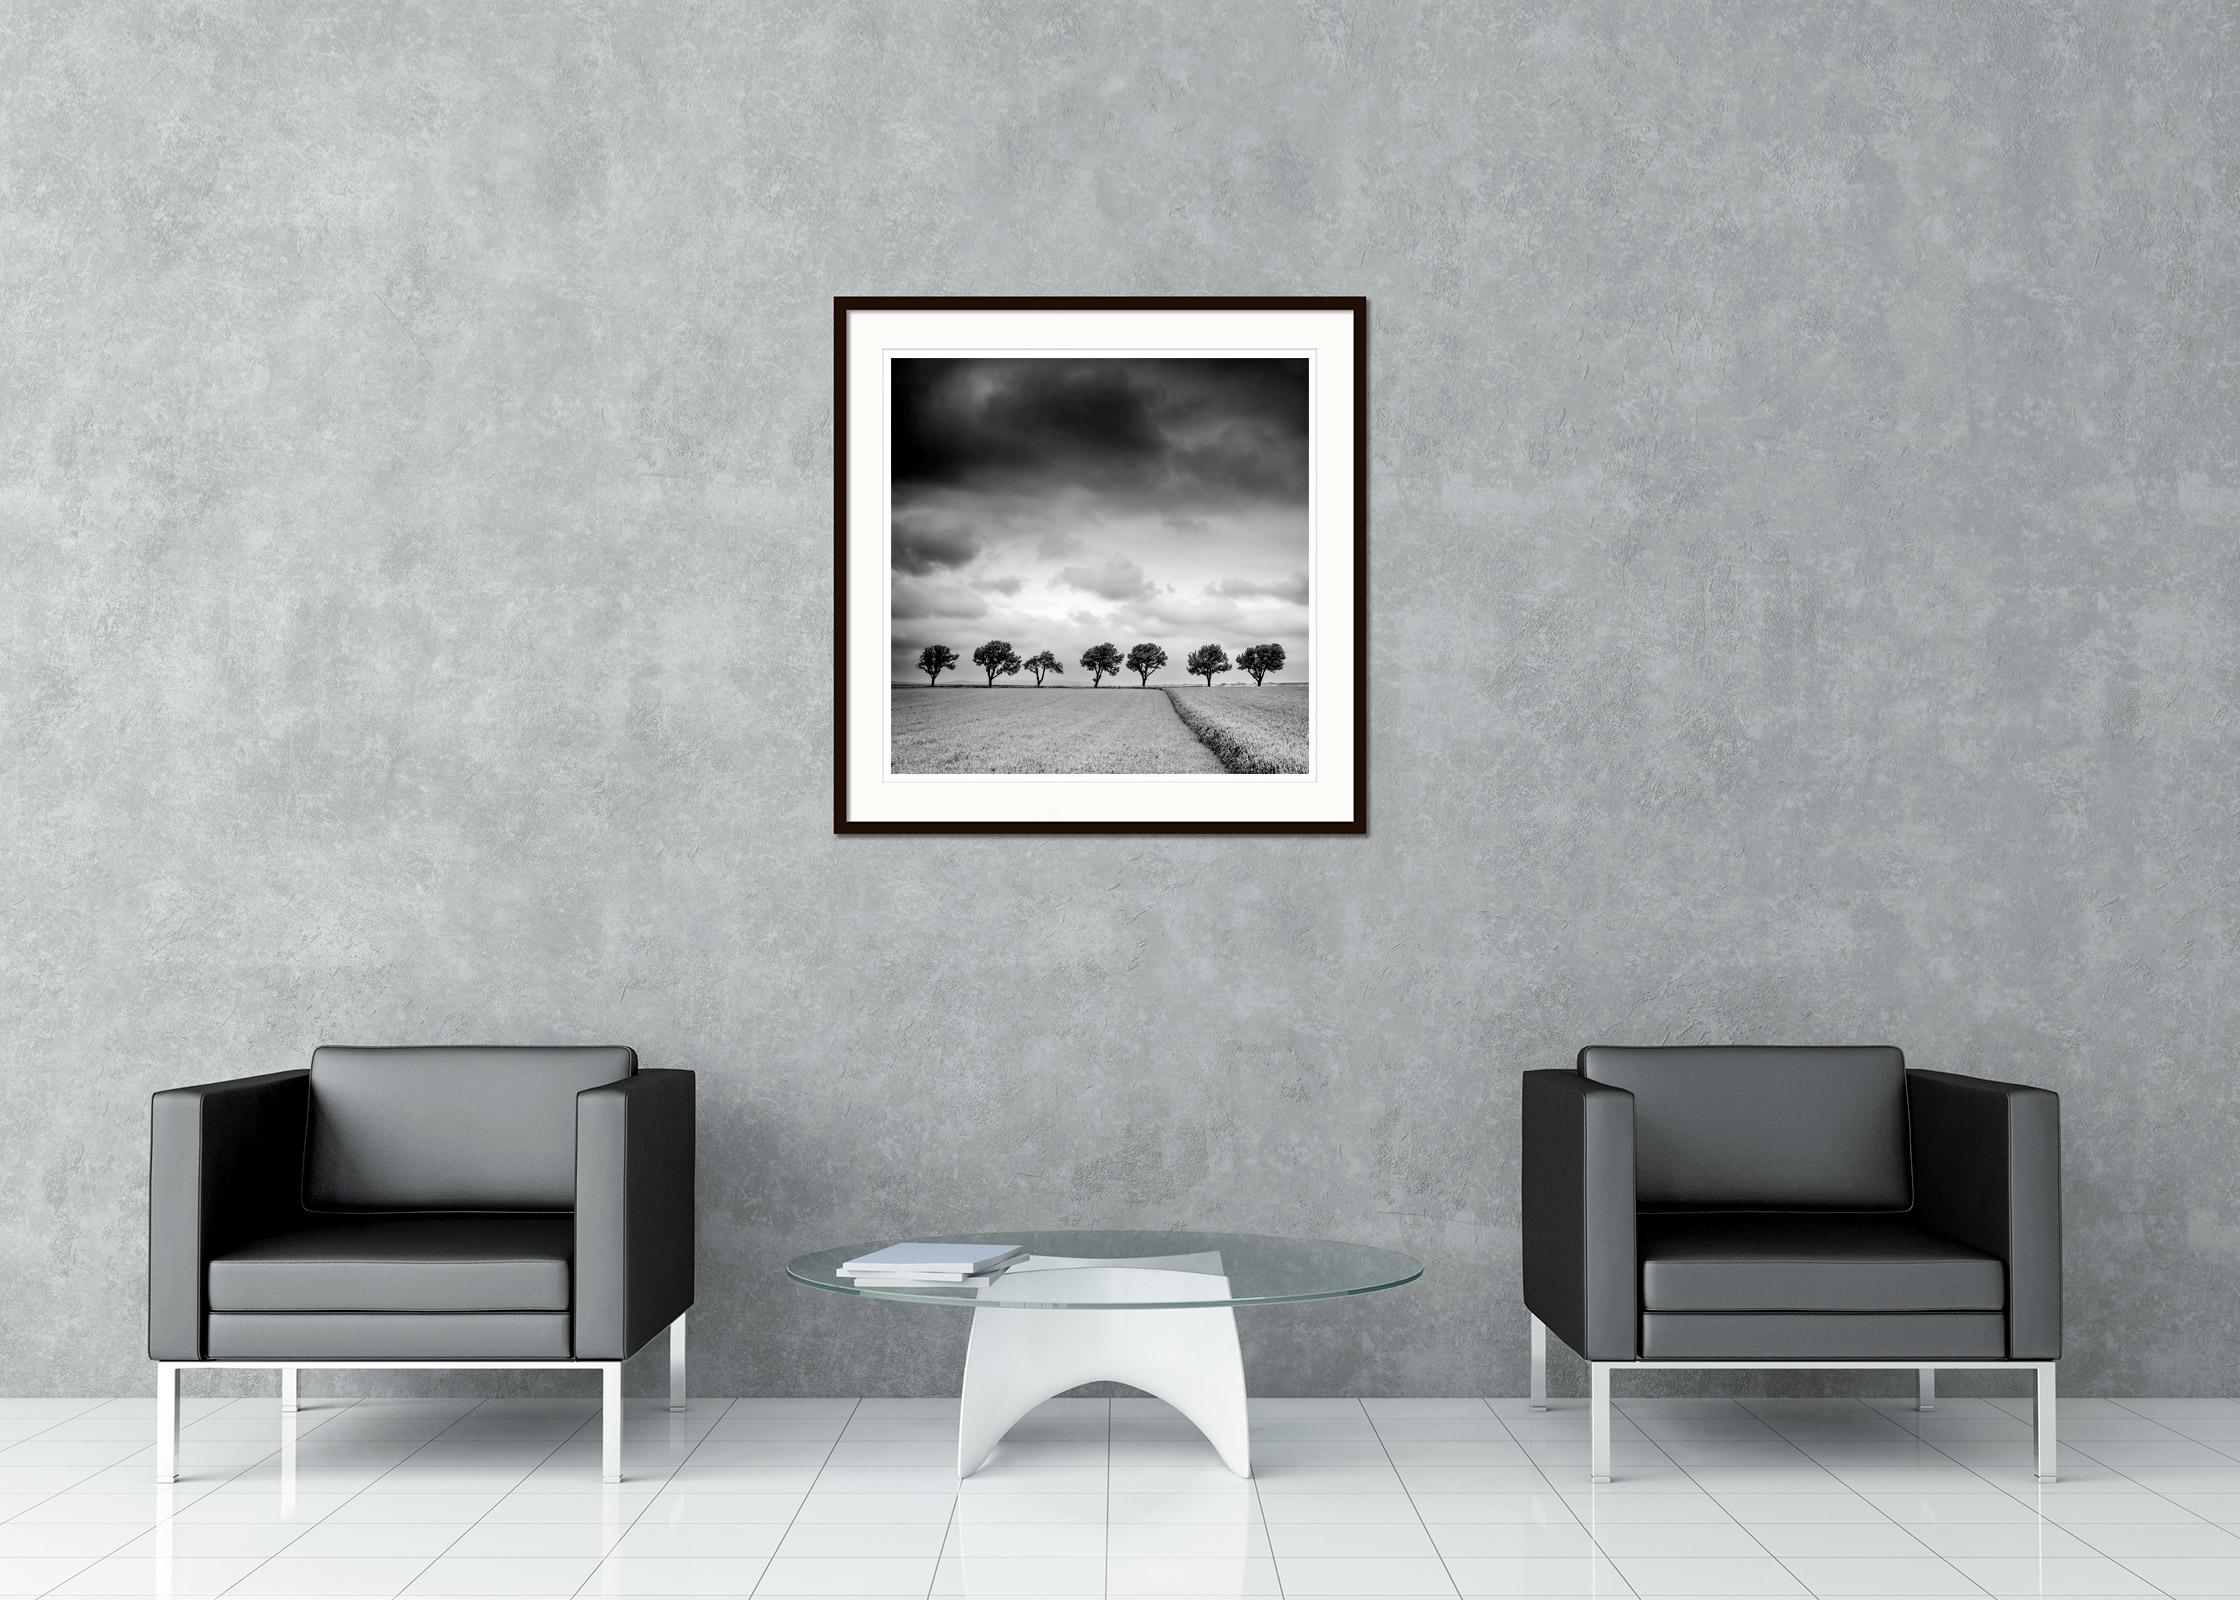 Black and White Fine Art Landscape Photography. Row of trees at the edge of the field during a storm with heavy clouds, Austria. Archival pigment ink print, edition of 7. Signed, titled, dated and numbered by artist. Certificate of authenticity